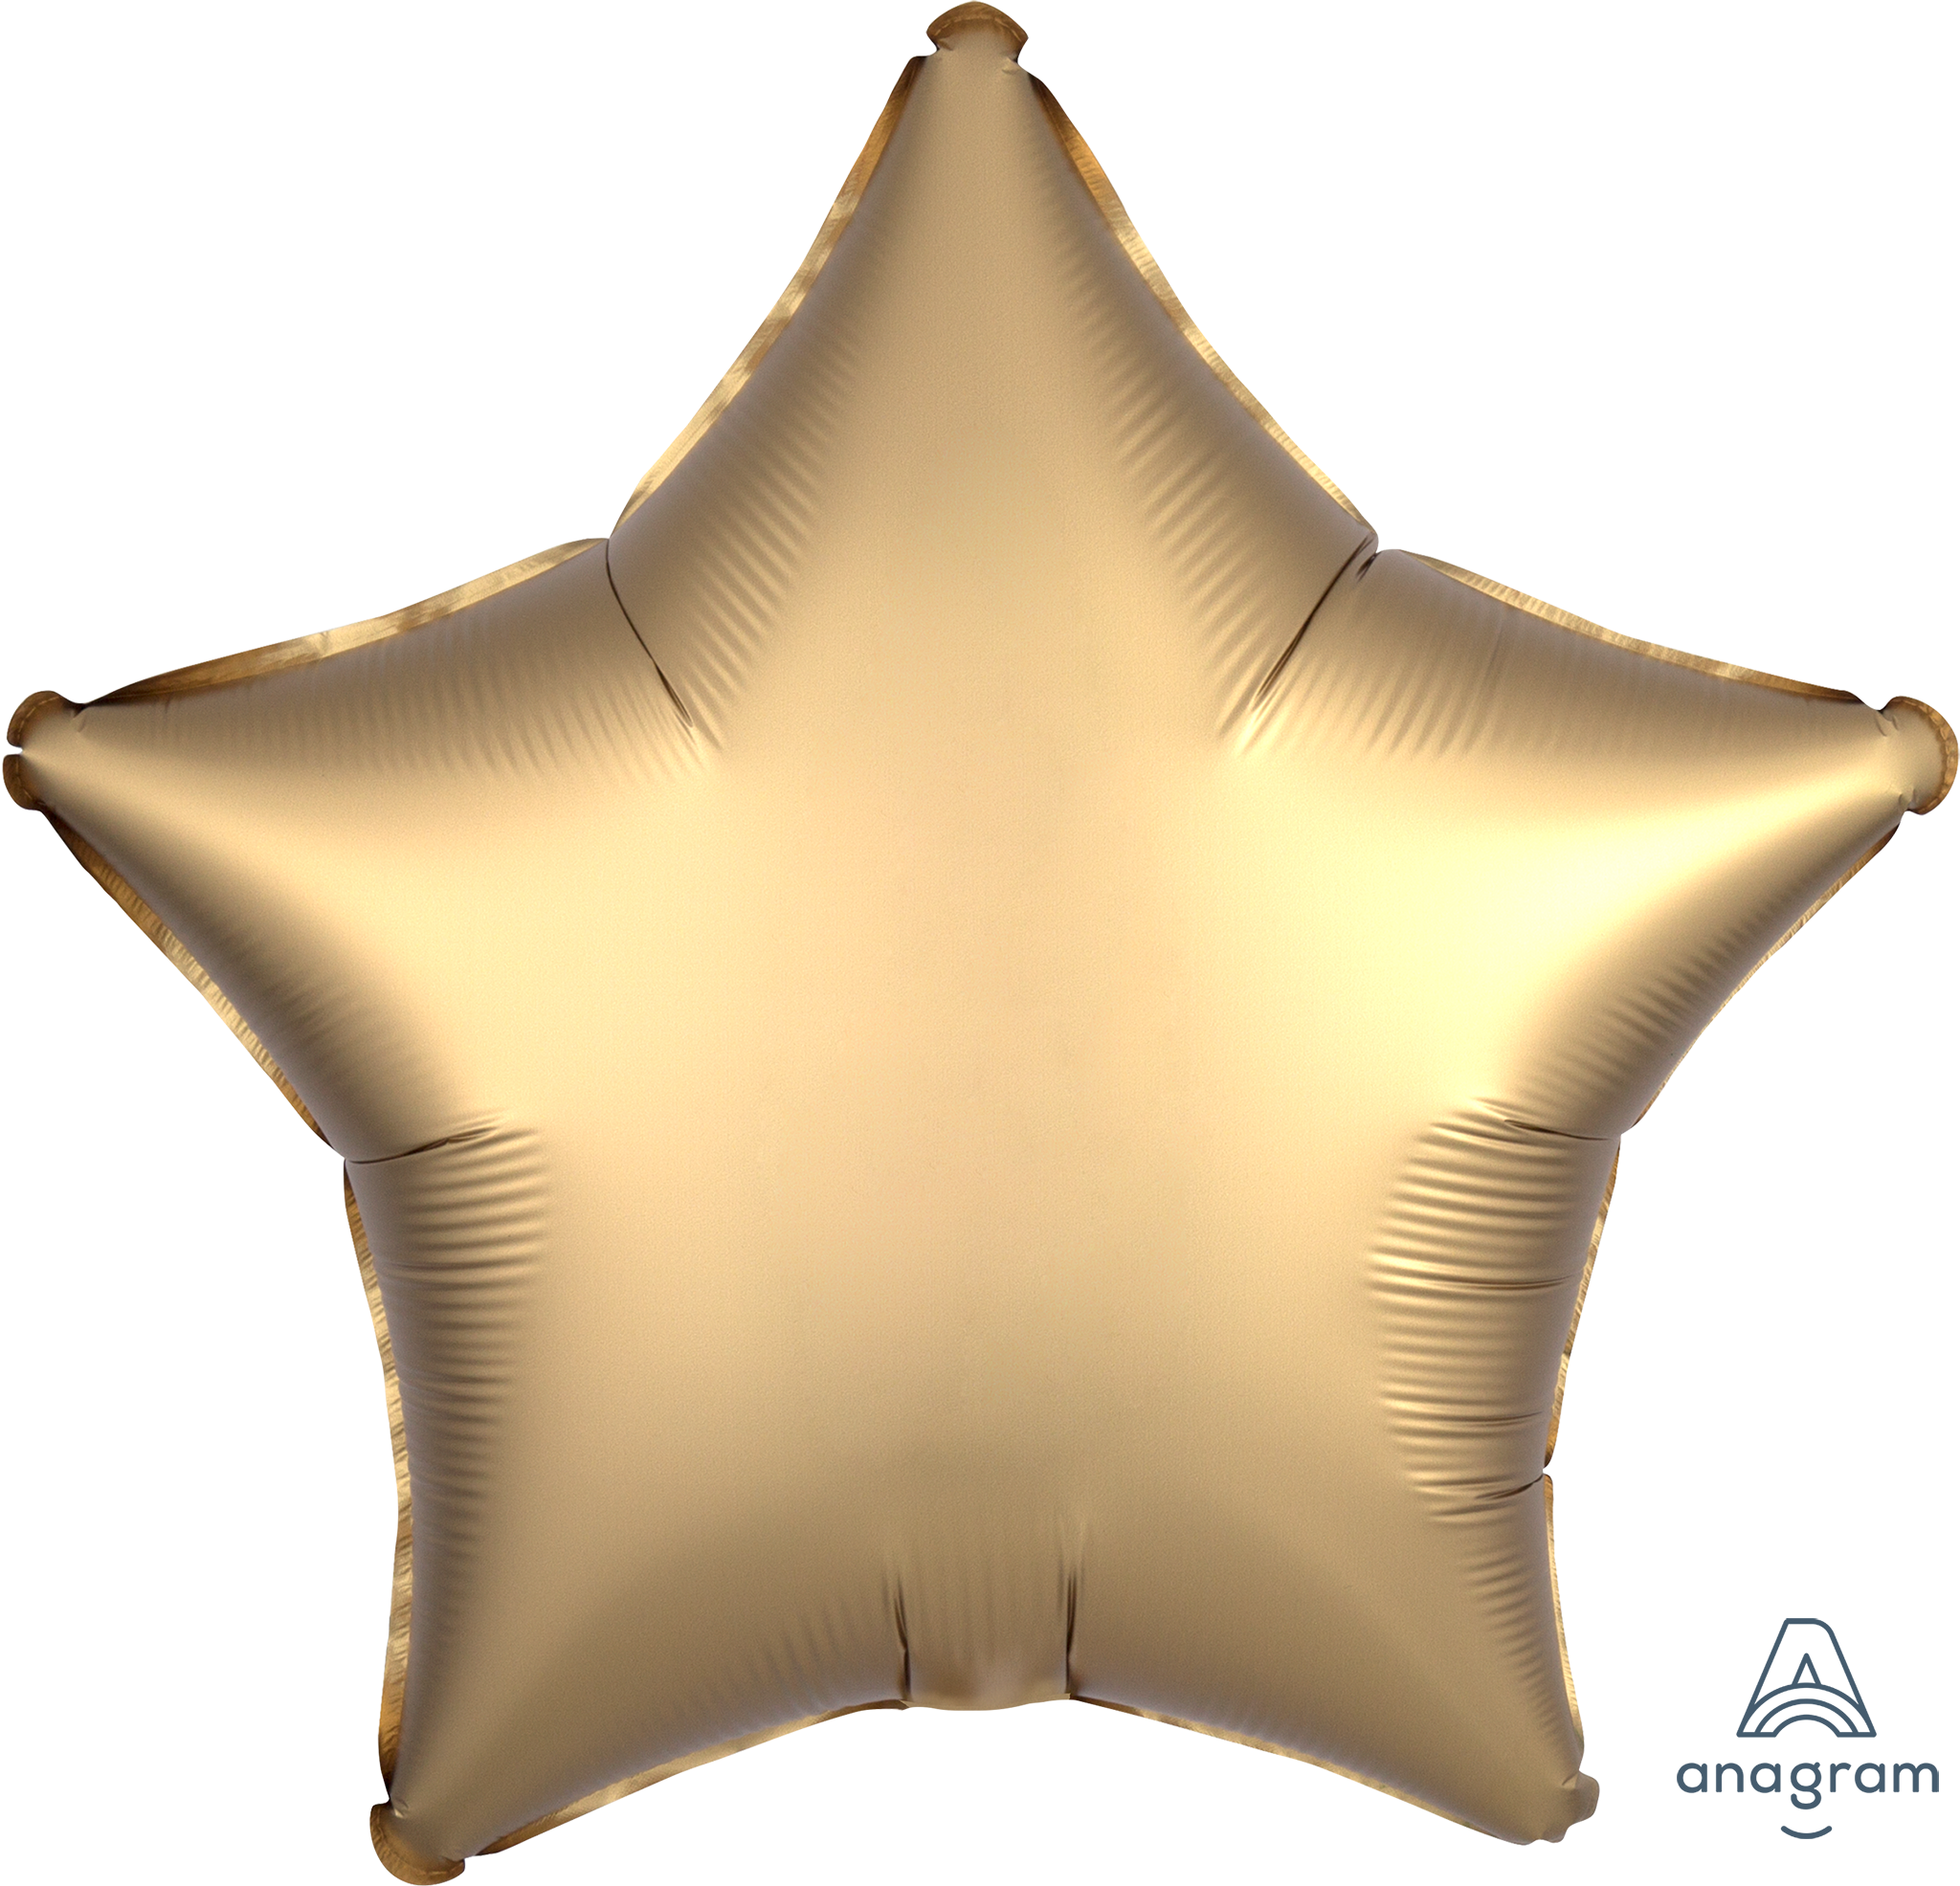 18"-solid-satin-luxe-gold-star-balloon-unicorn-party-decorations-graduation-party